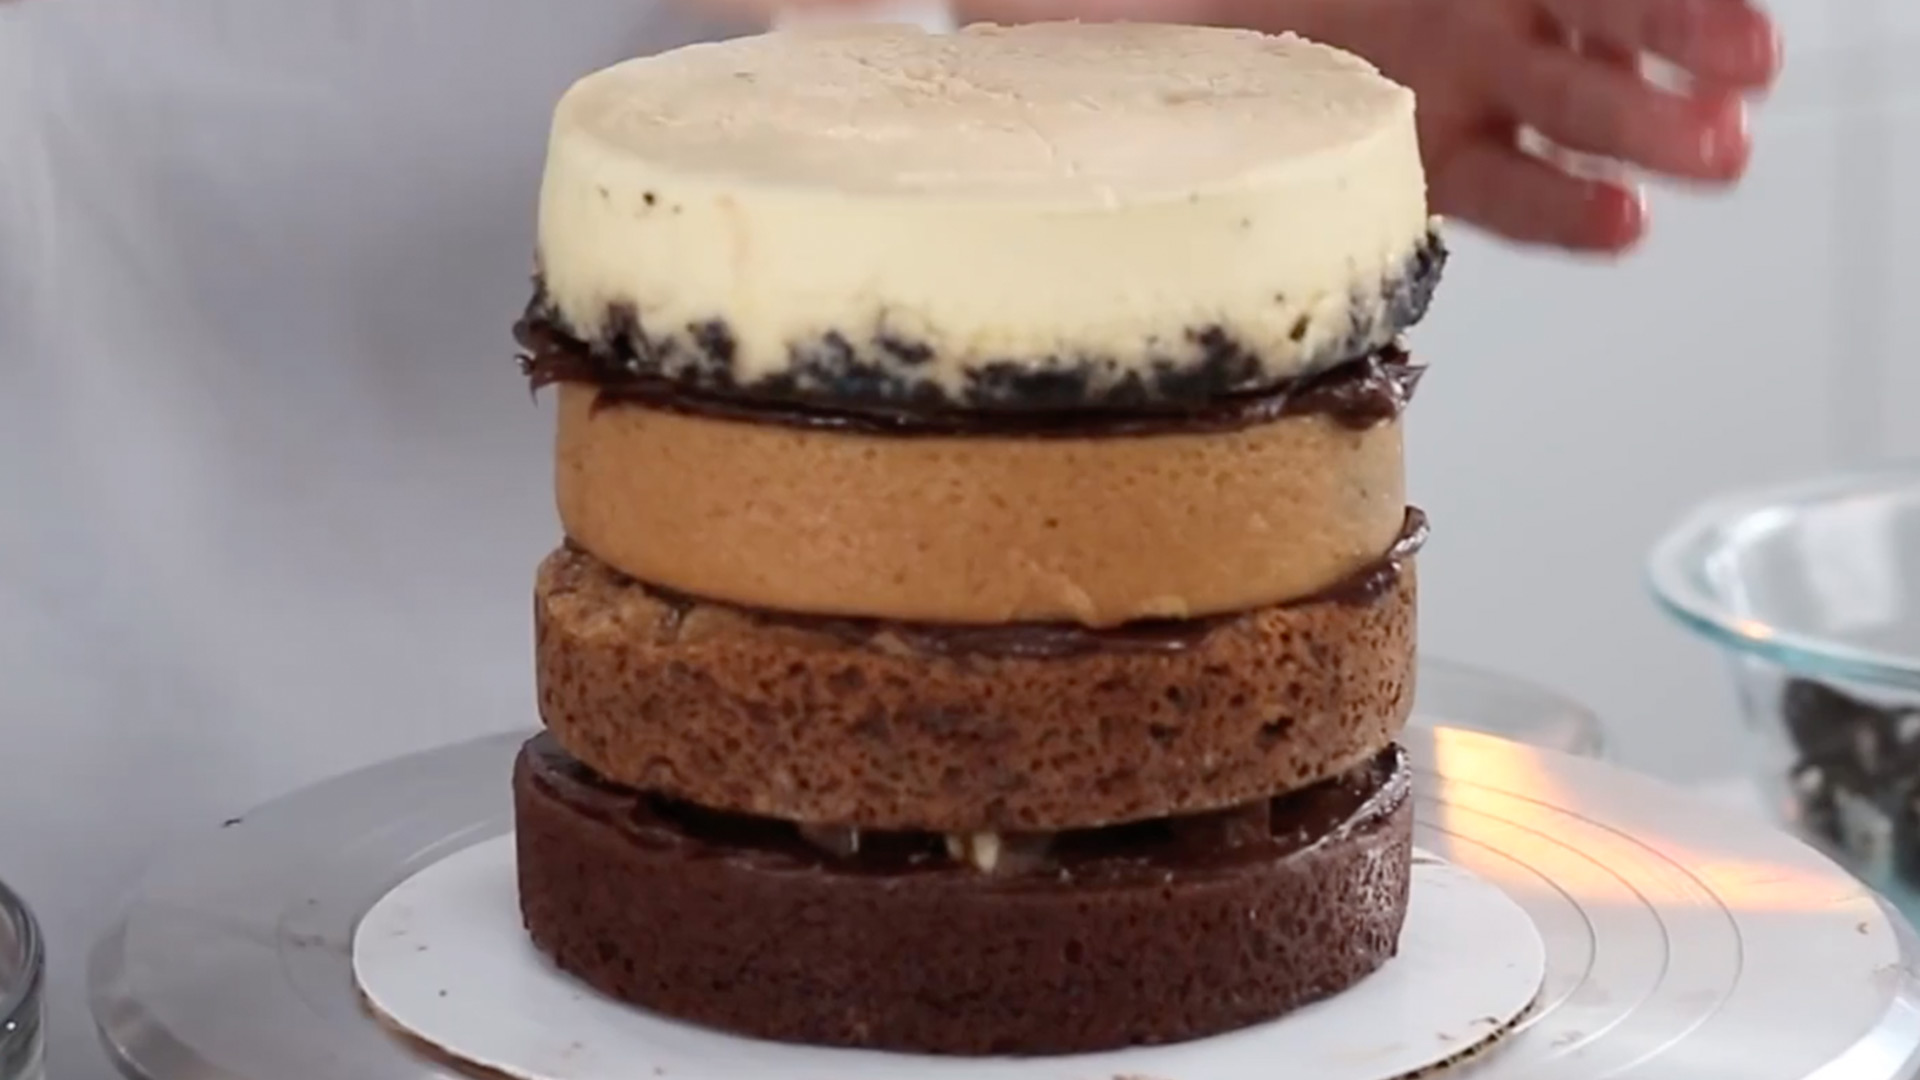 Vanilla Cheesecake with Chocolate Cookie Crustarticle featured image thumbnail.